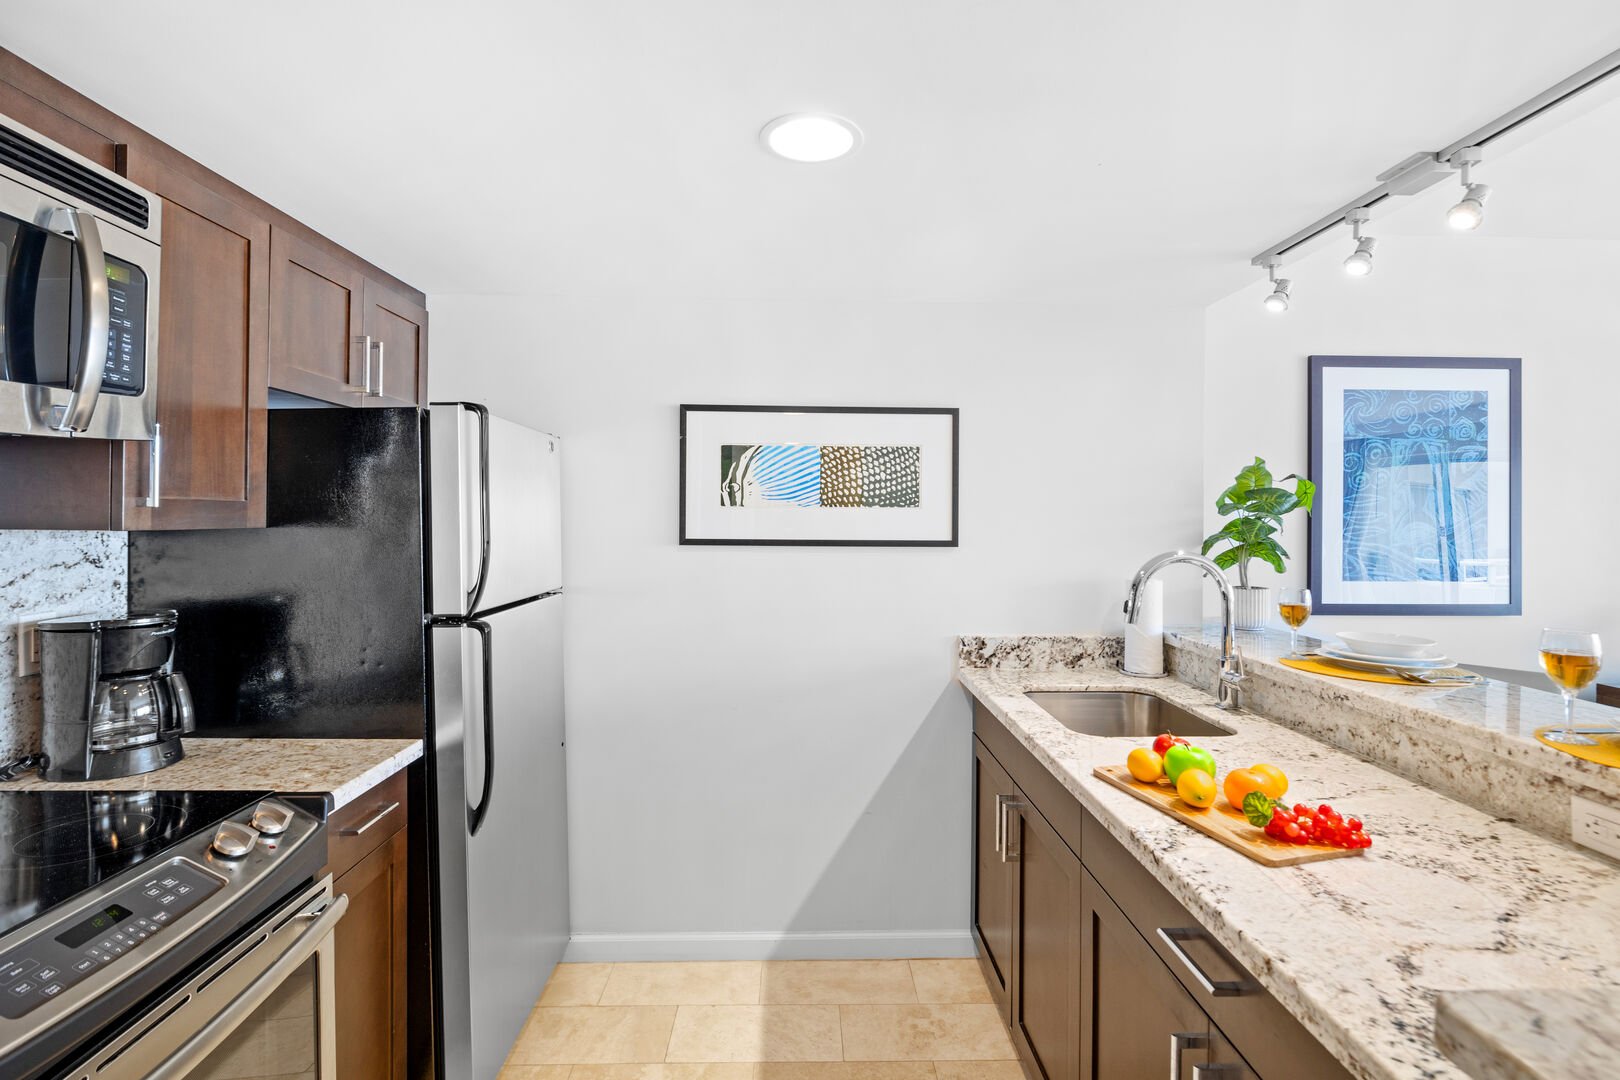 Fully equipped kitchen with full-size new appliances